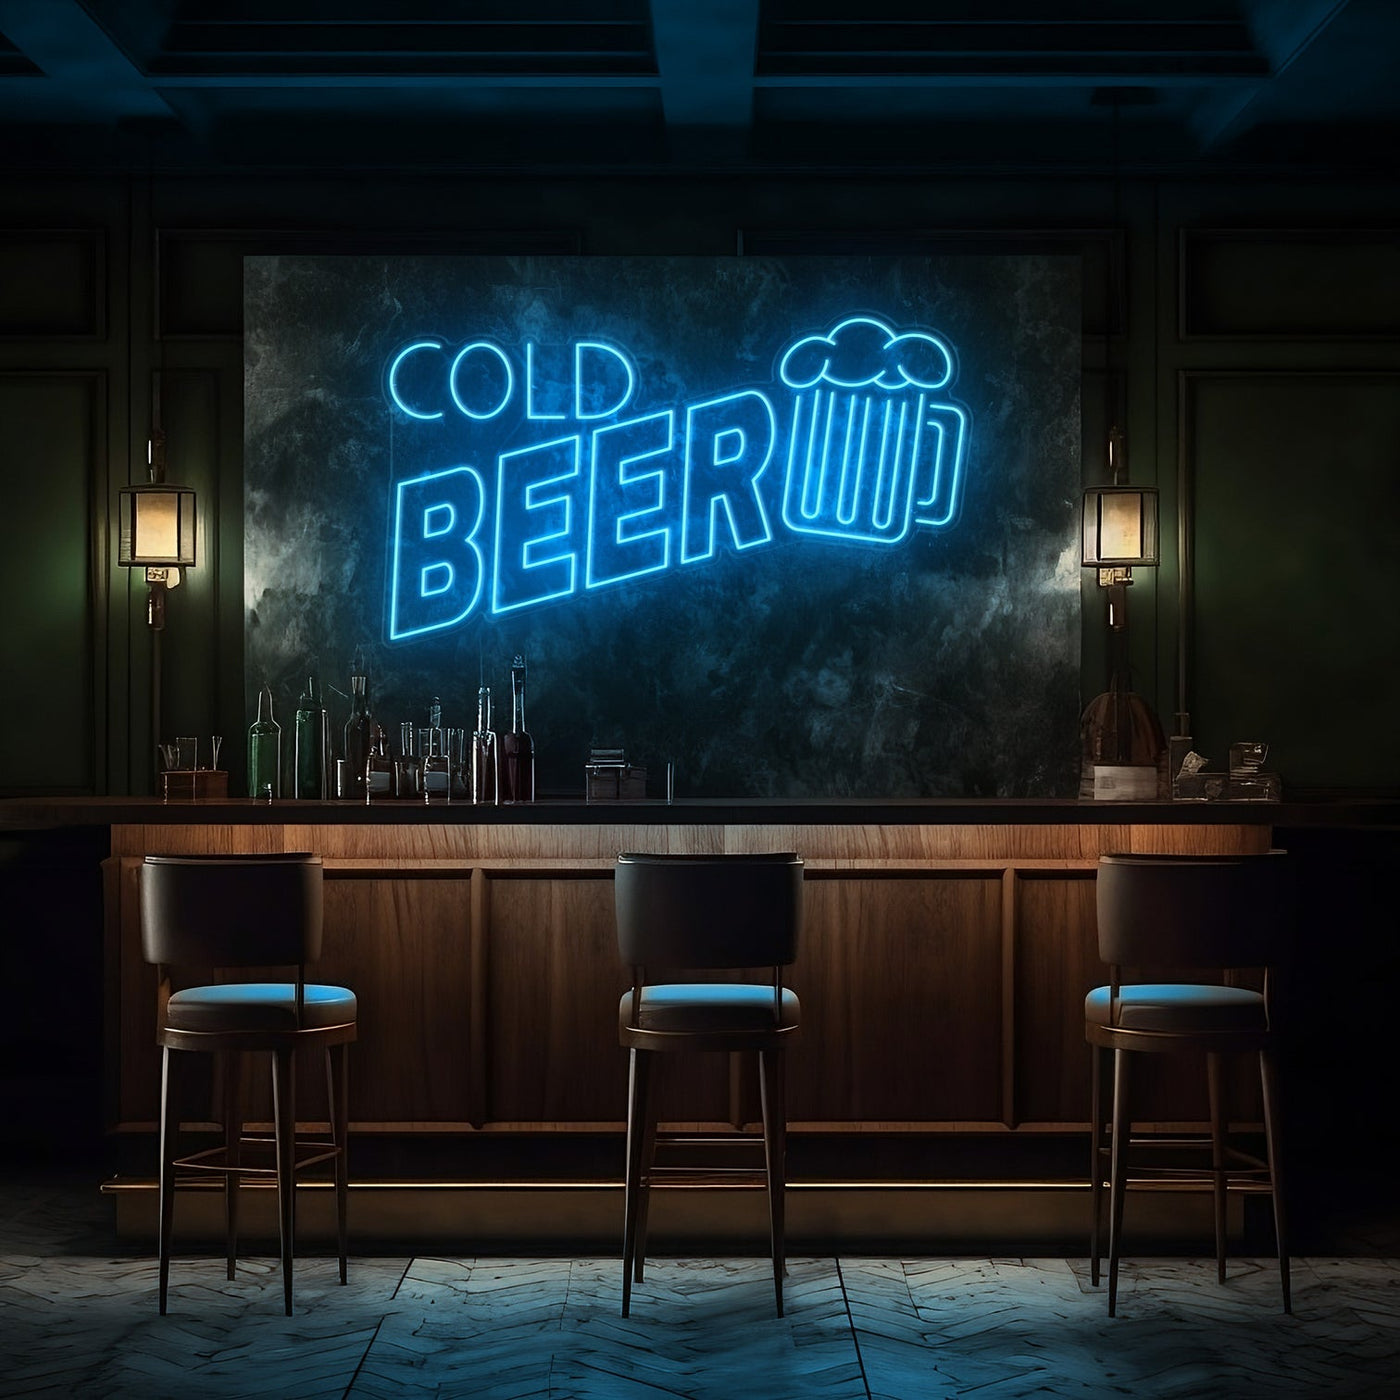 Cold Beer Bar LED Neon Sign - 30 InchIce Blue